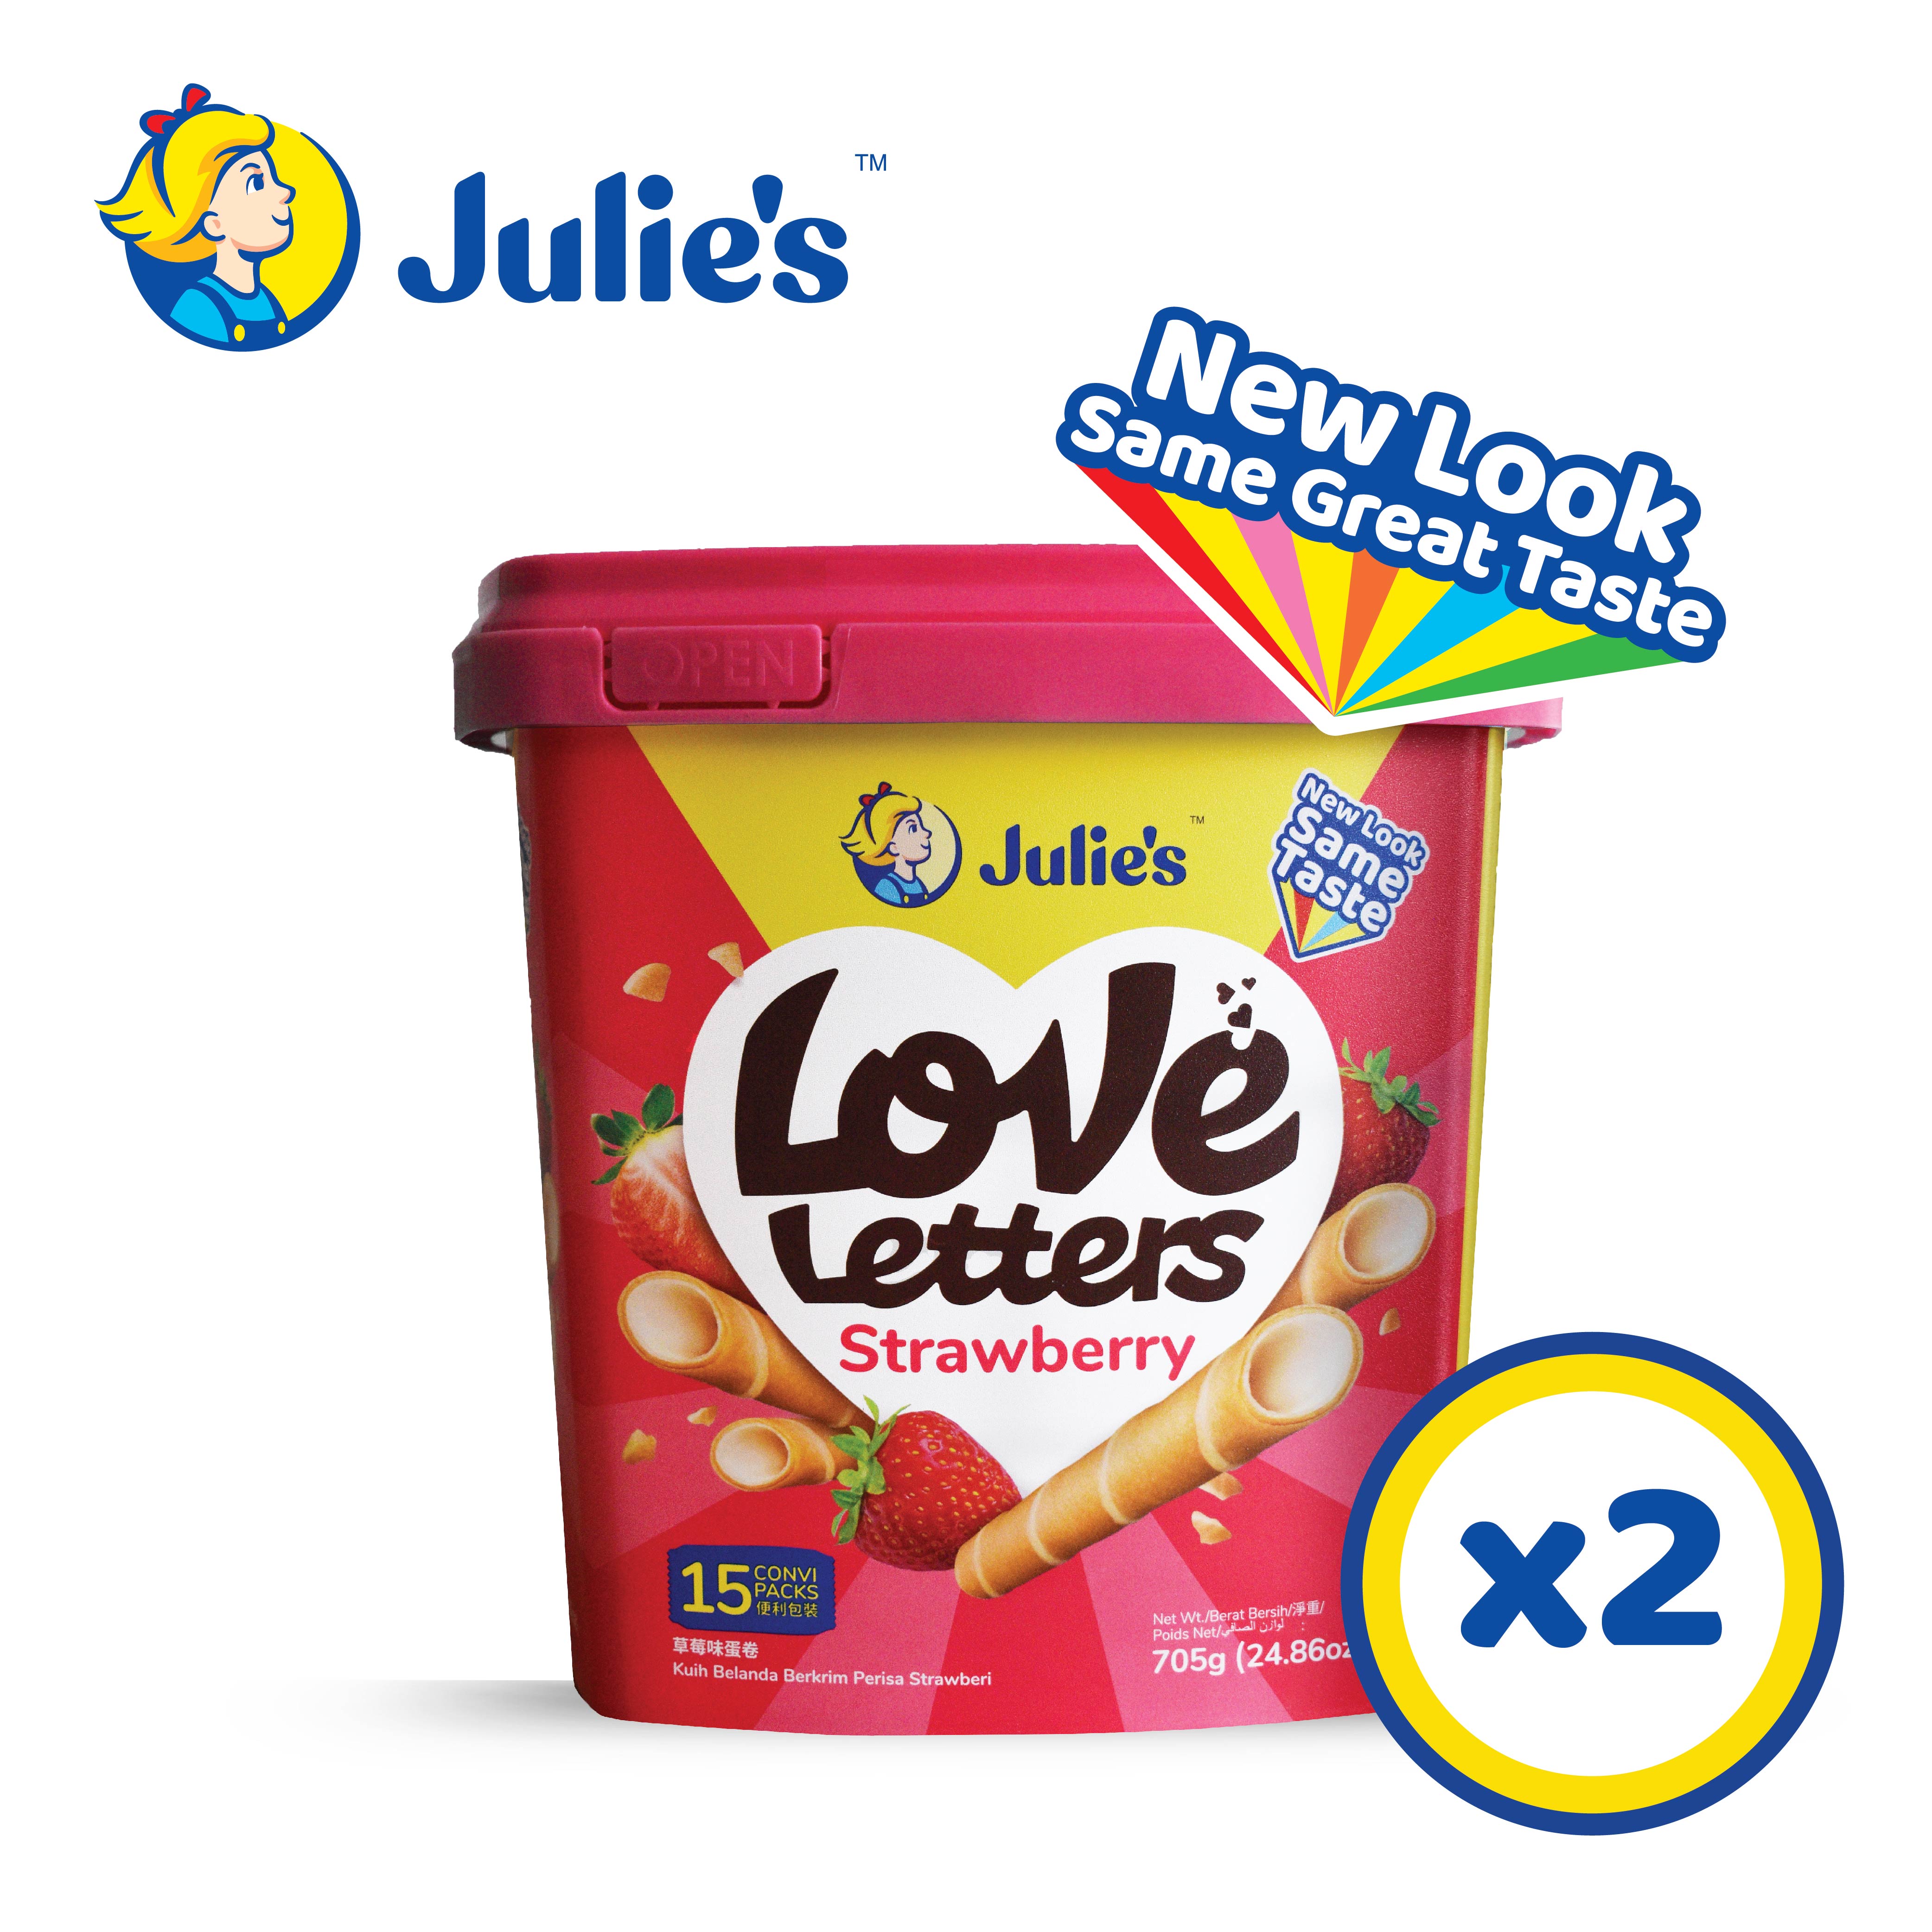 Julie's Love Letters Strawberry 705g x 2 tubs